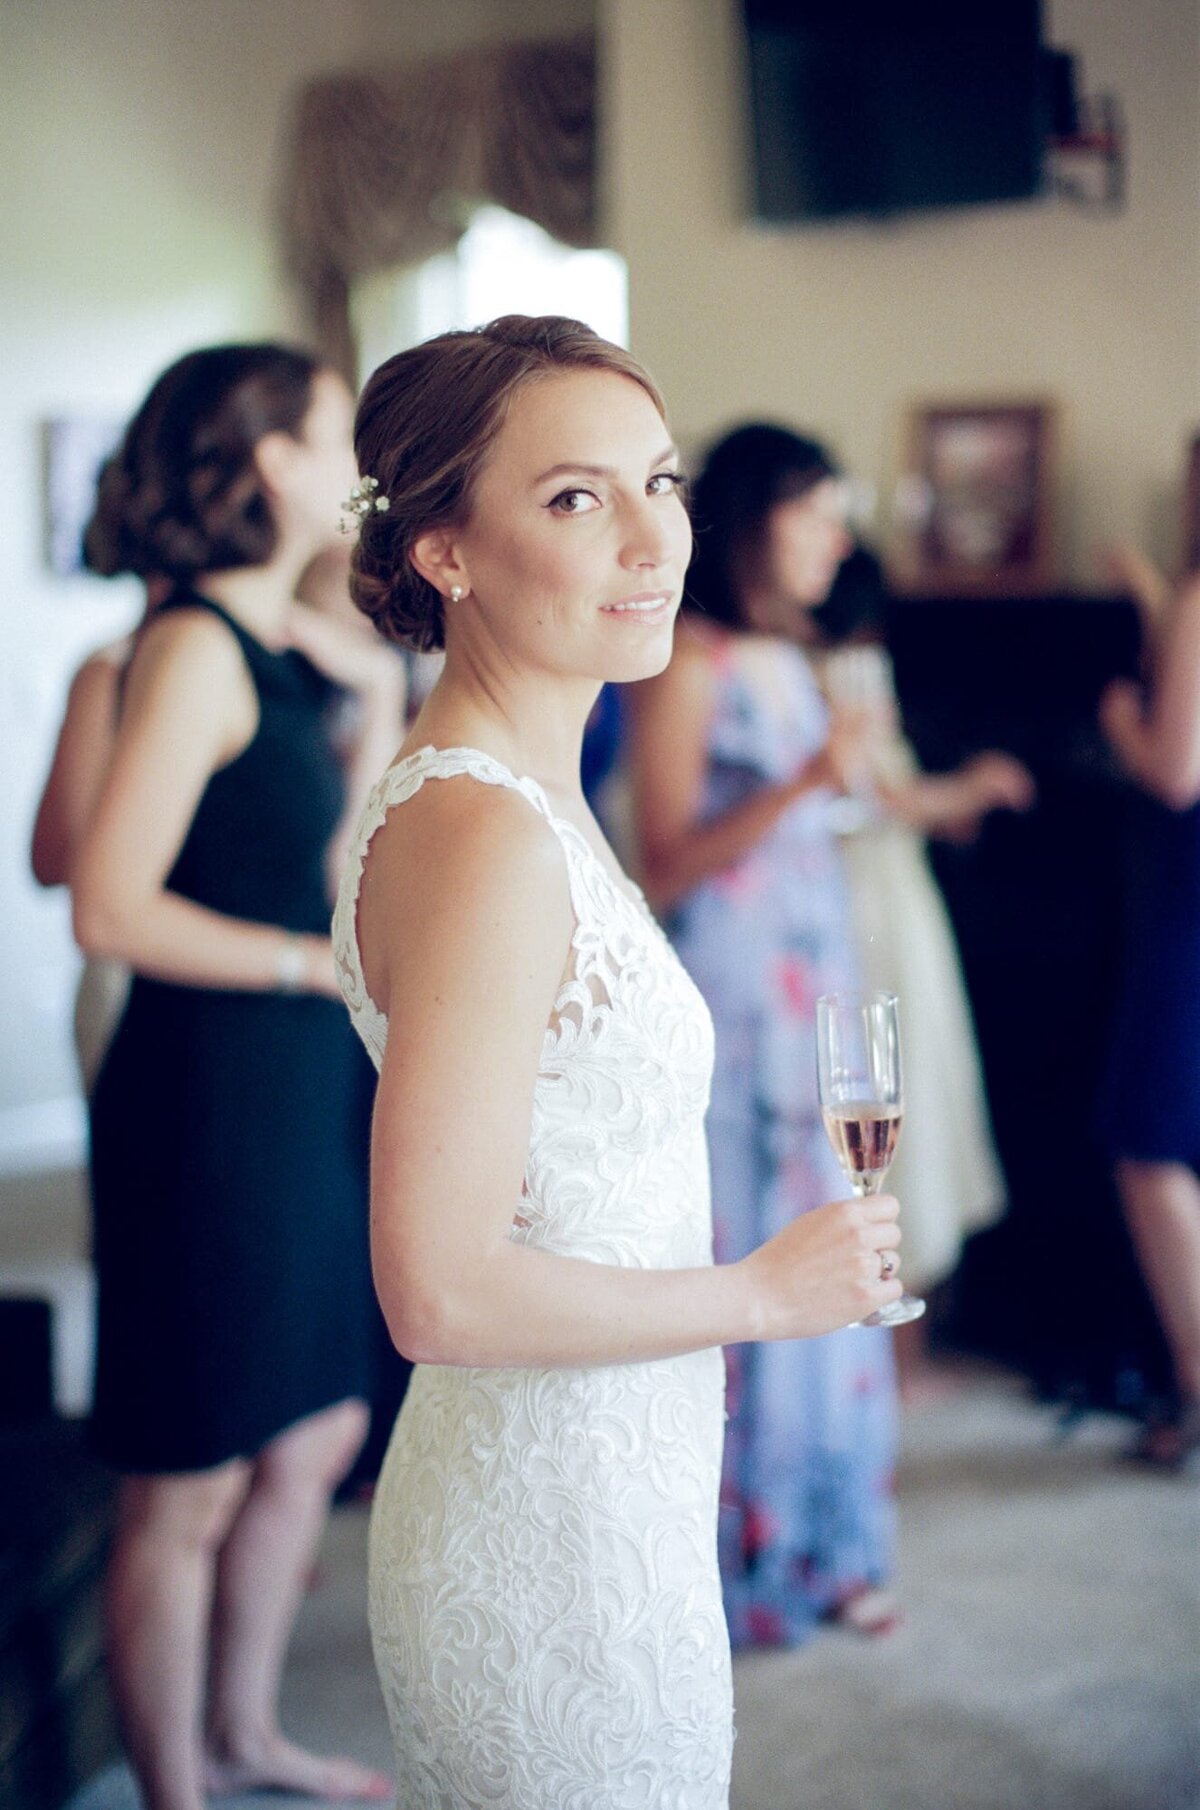 Side-angle capture of a beautiful wedding bride holding a drink and looking at the camera.